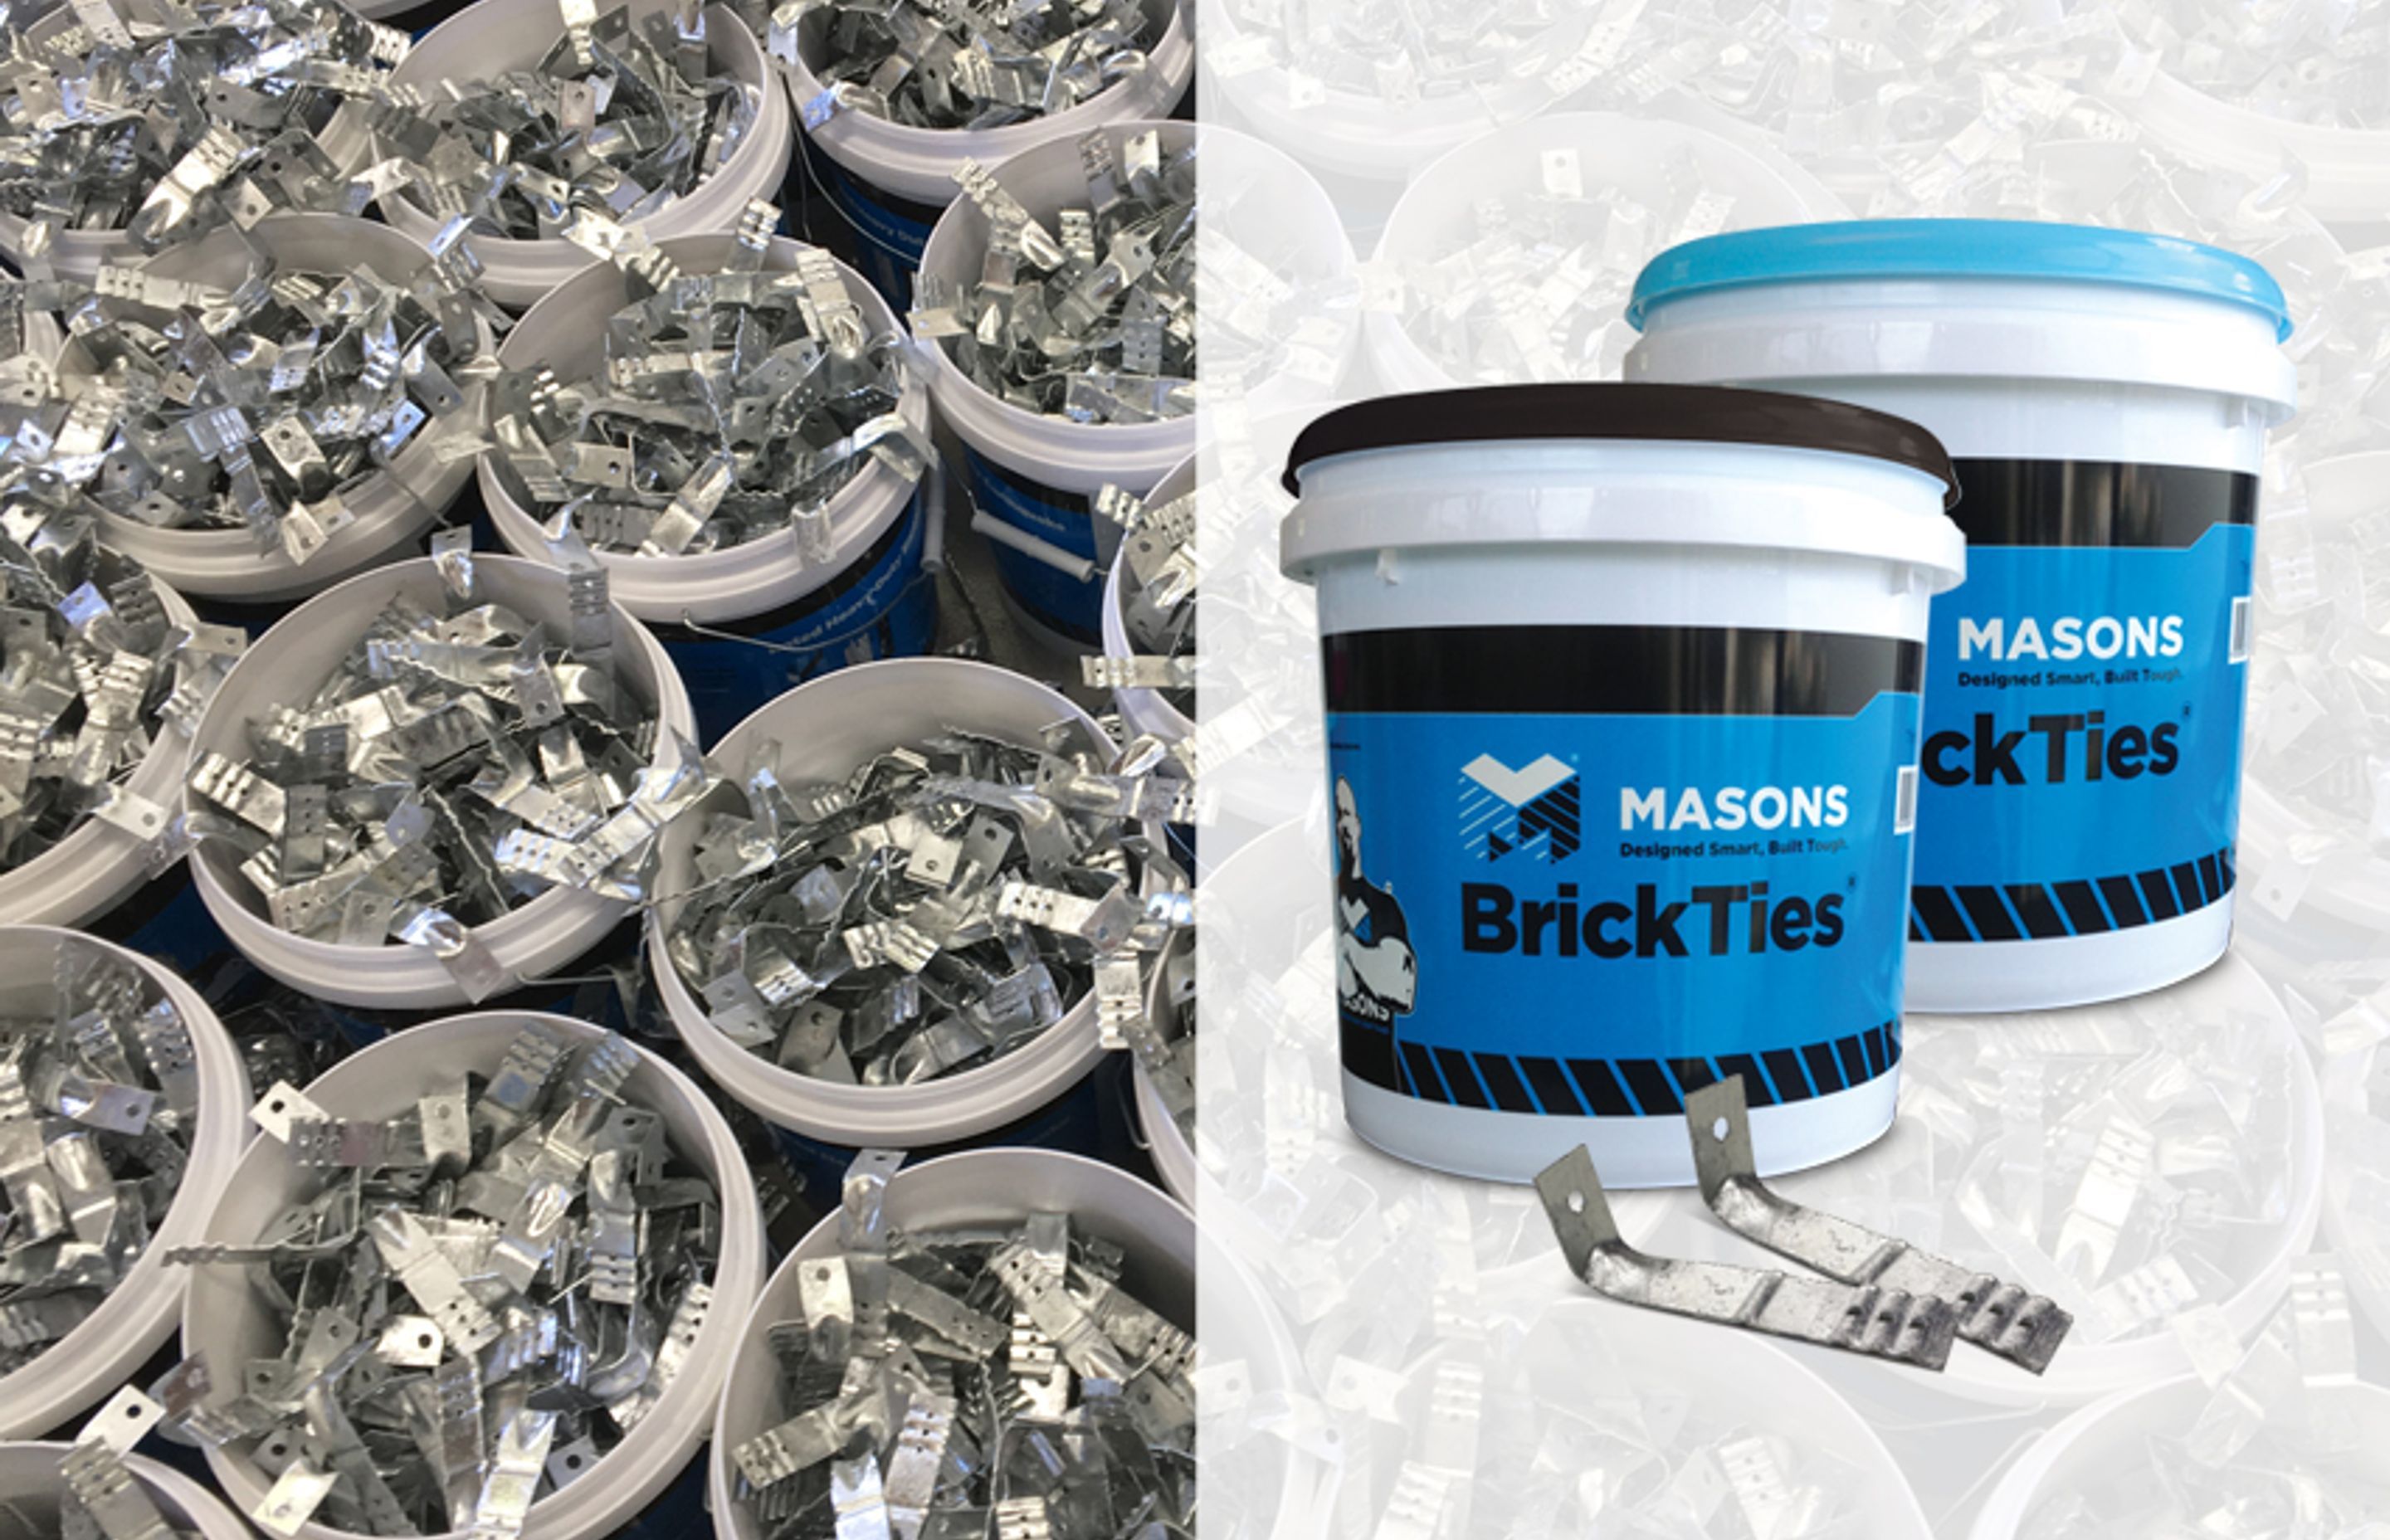 BrickTies the first innovation from Masons, which helped establish the company as the 'go to' provider for bricklaying tools and consumables.